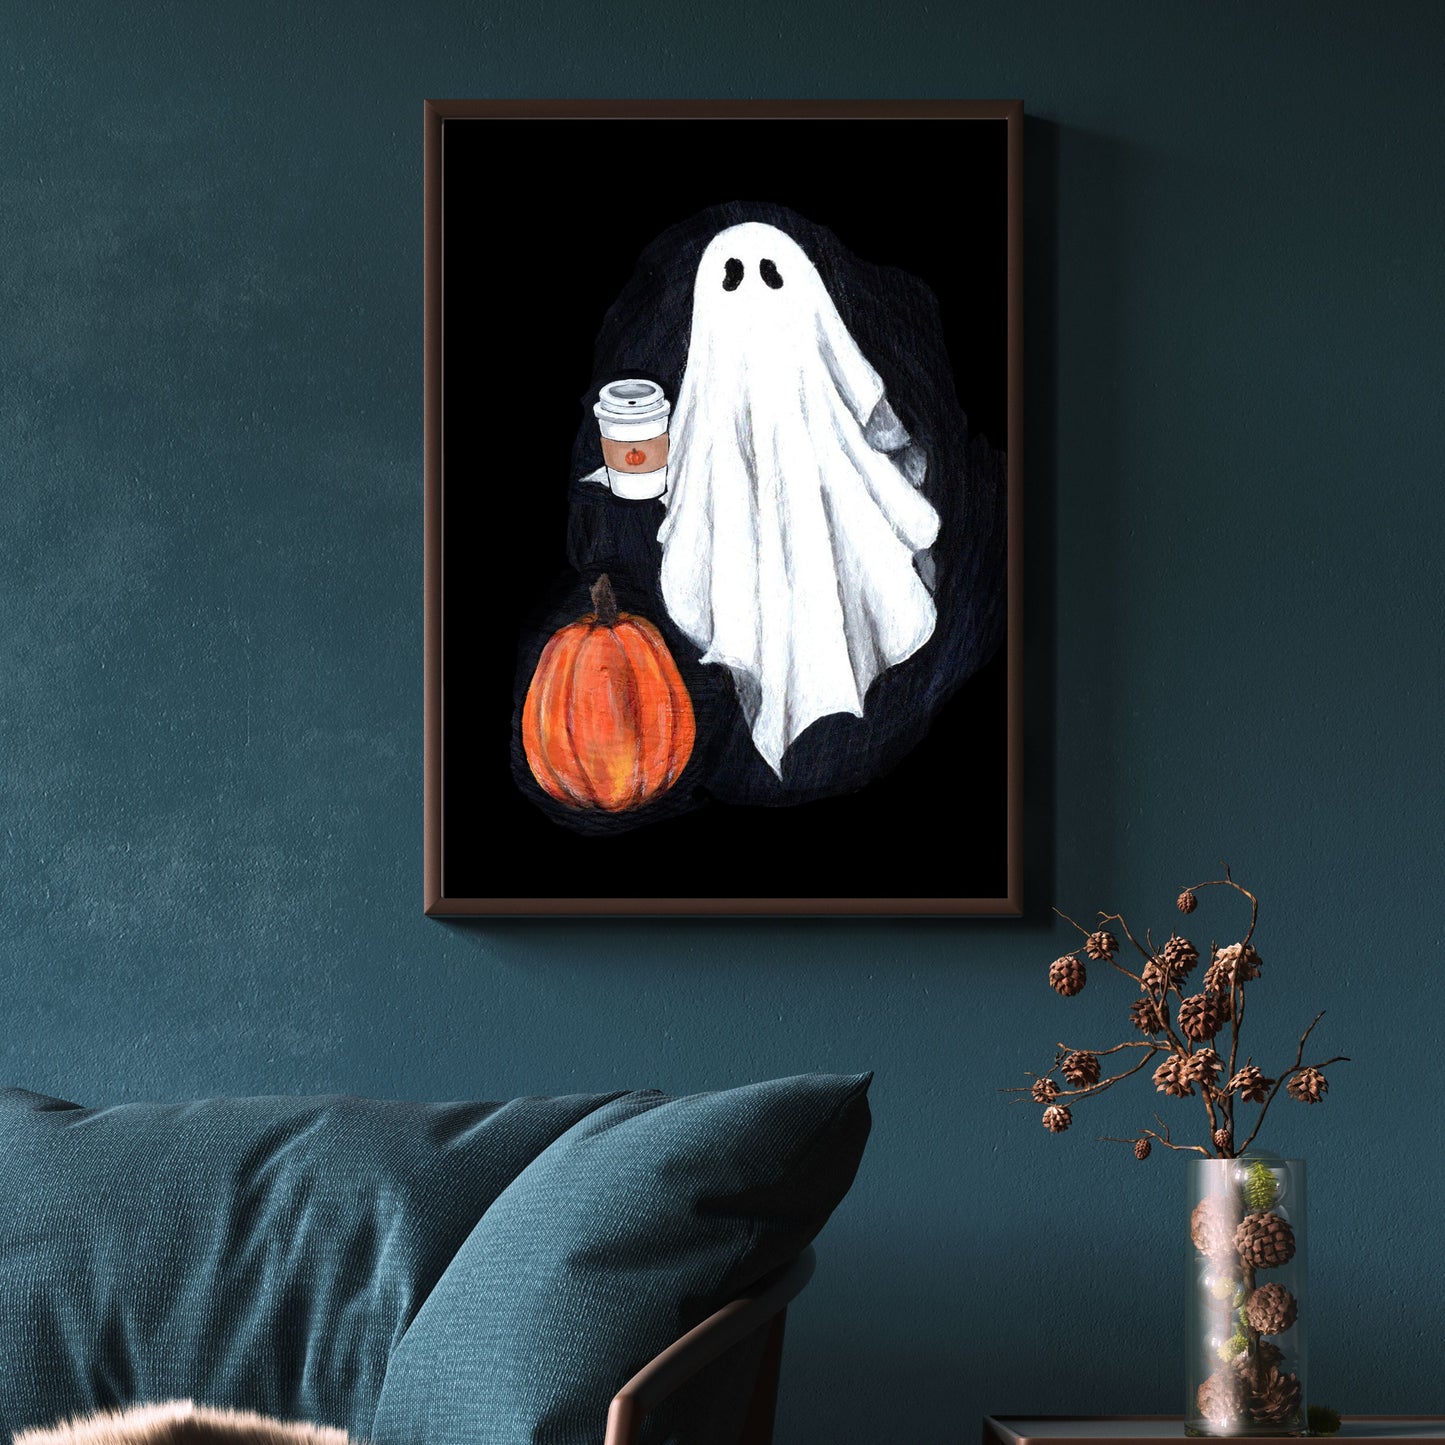 Halloween ghost wall art print, Spooky season room decor, Cute illustration print, Vintage ghost painting, Gothic art for her, Him, Friend